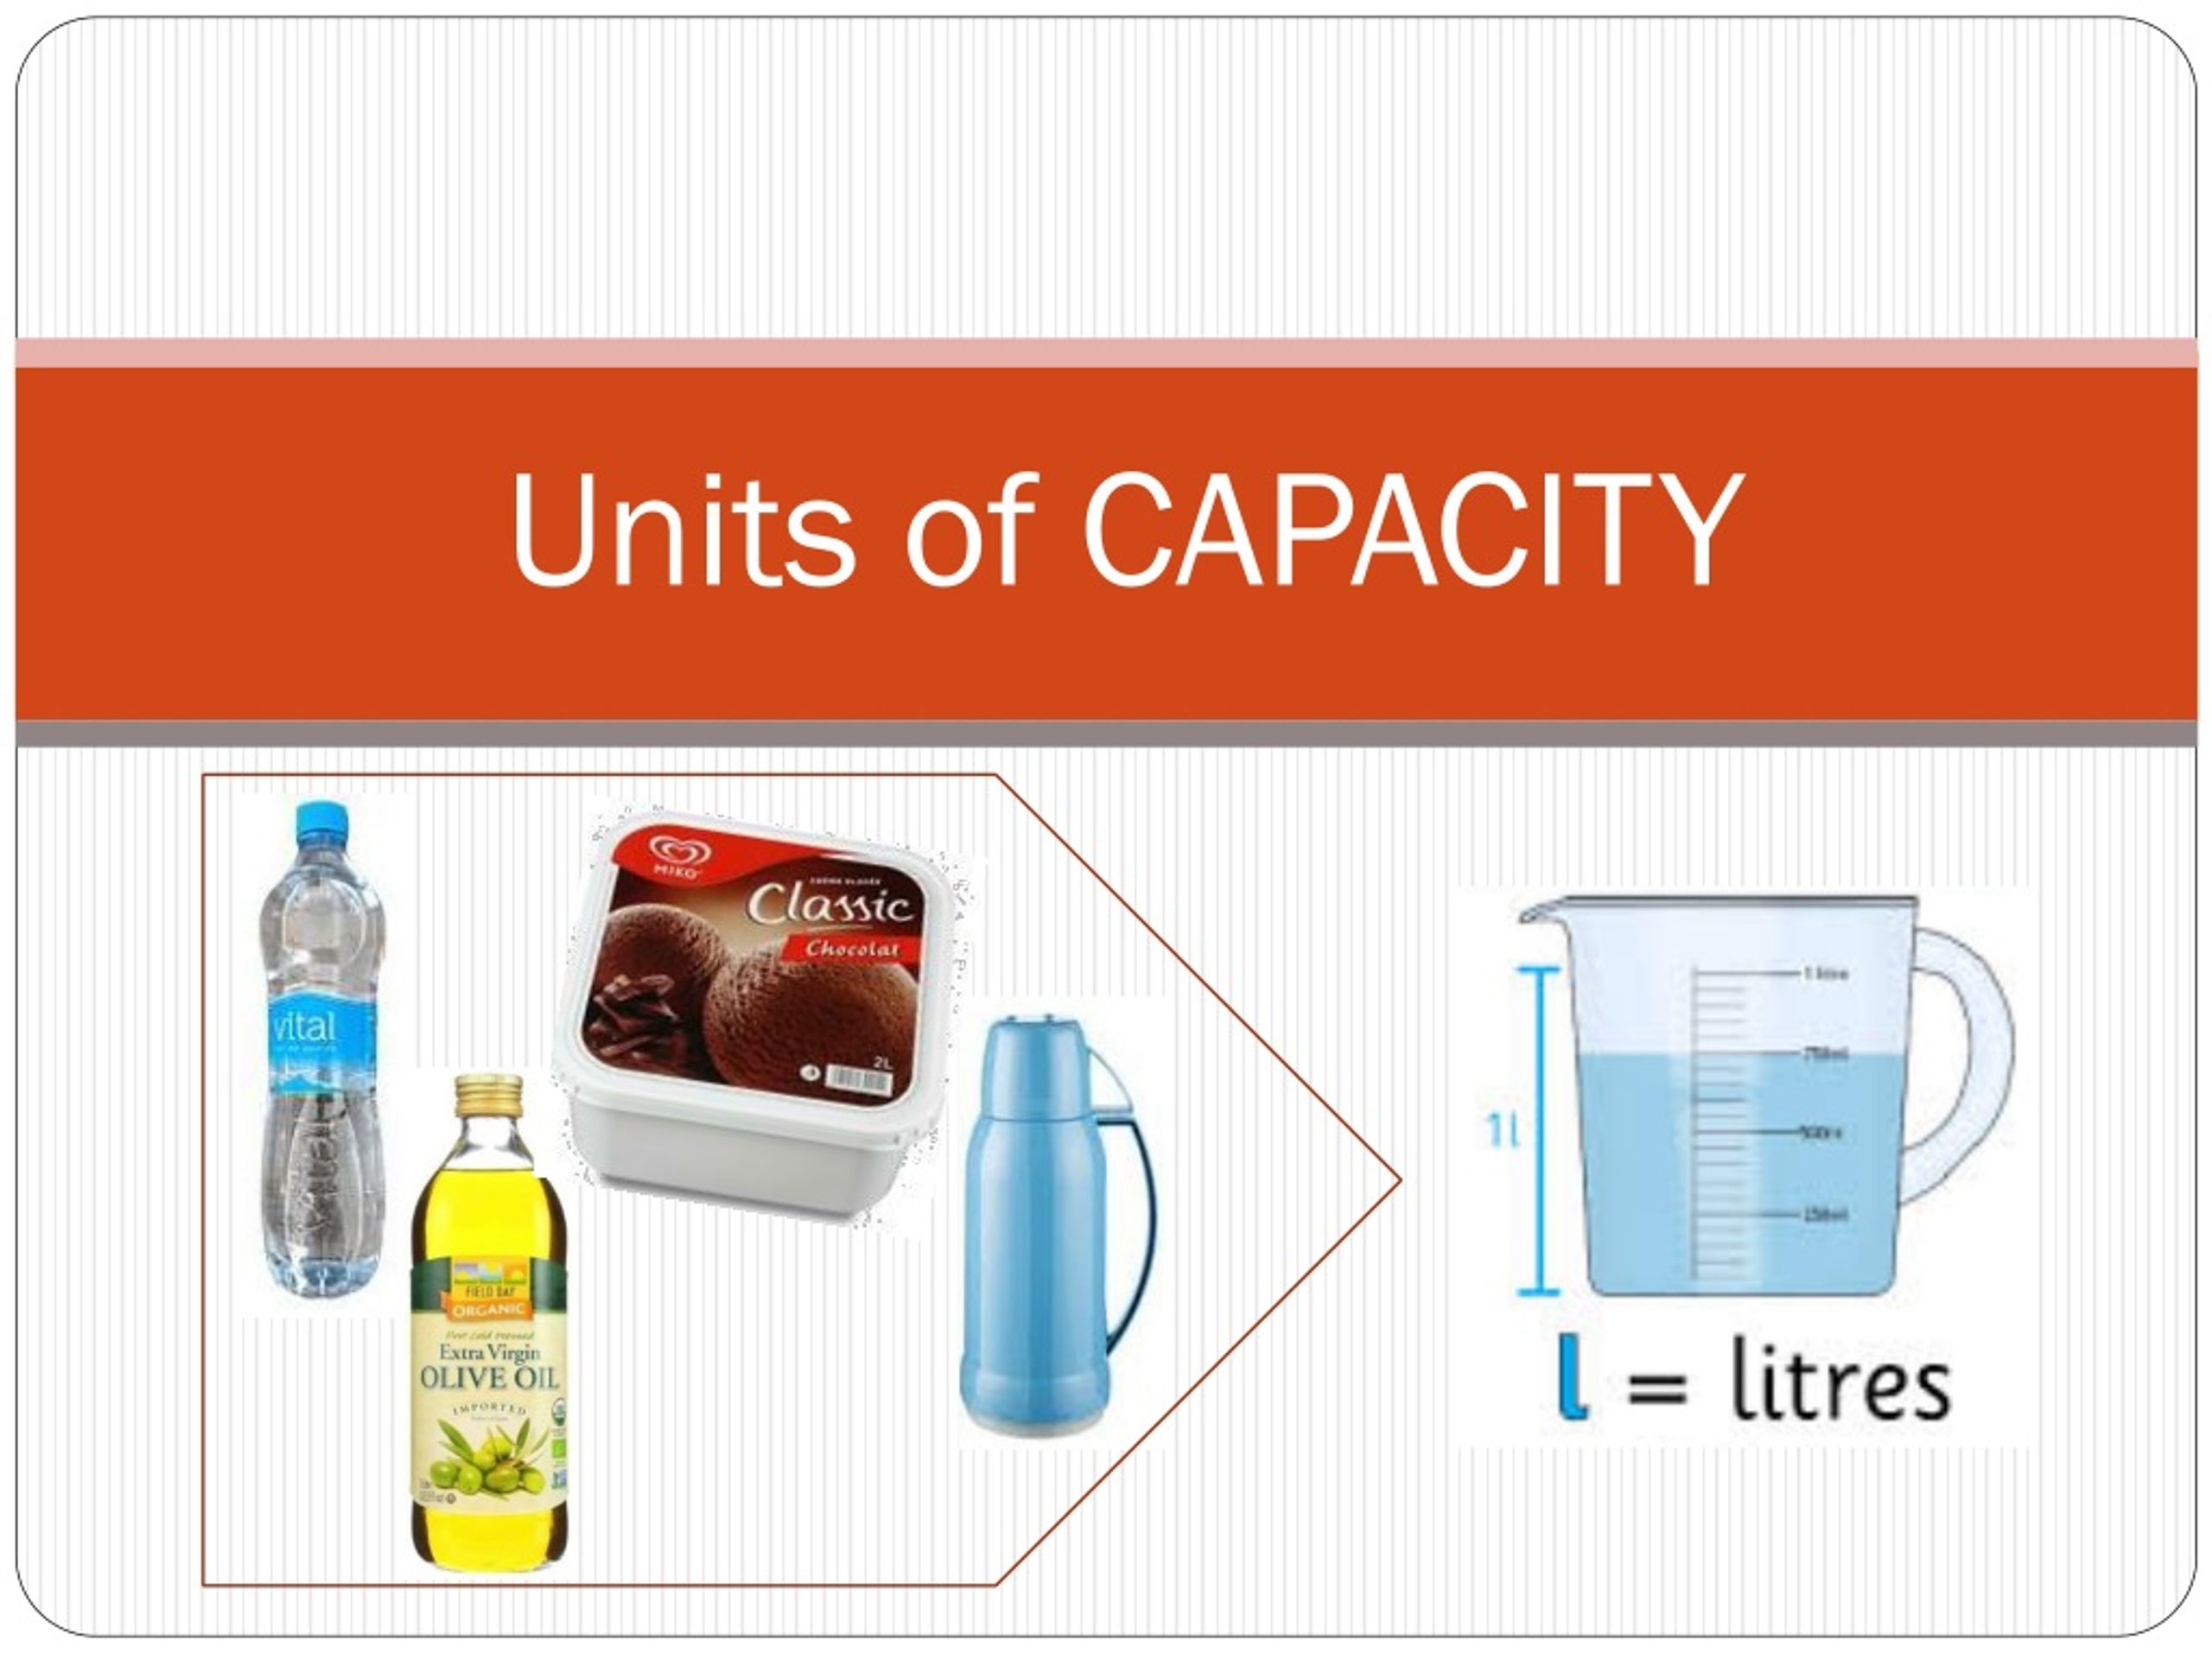 PPT - Units of CAPACITY PowerPoint Presentation, free download